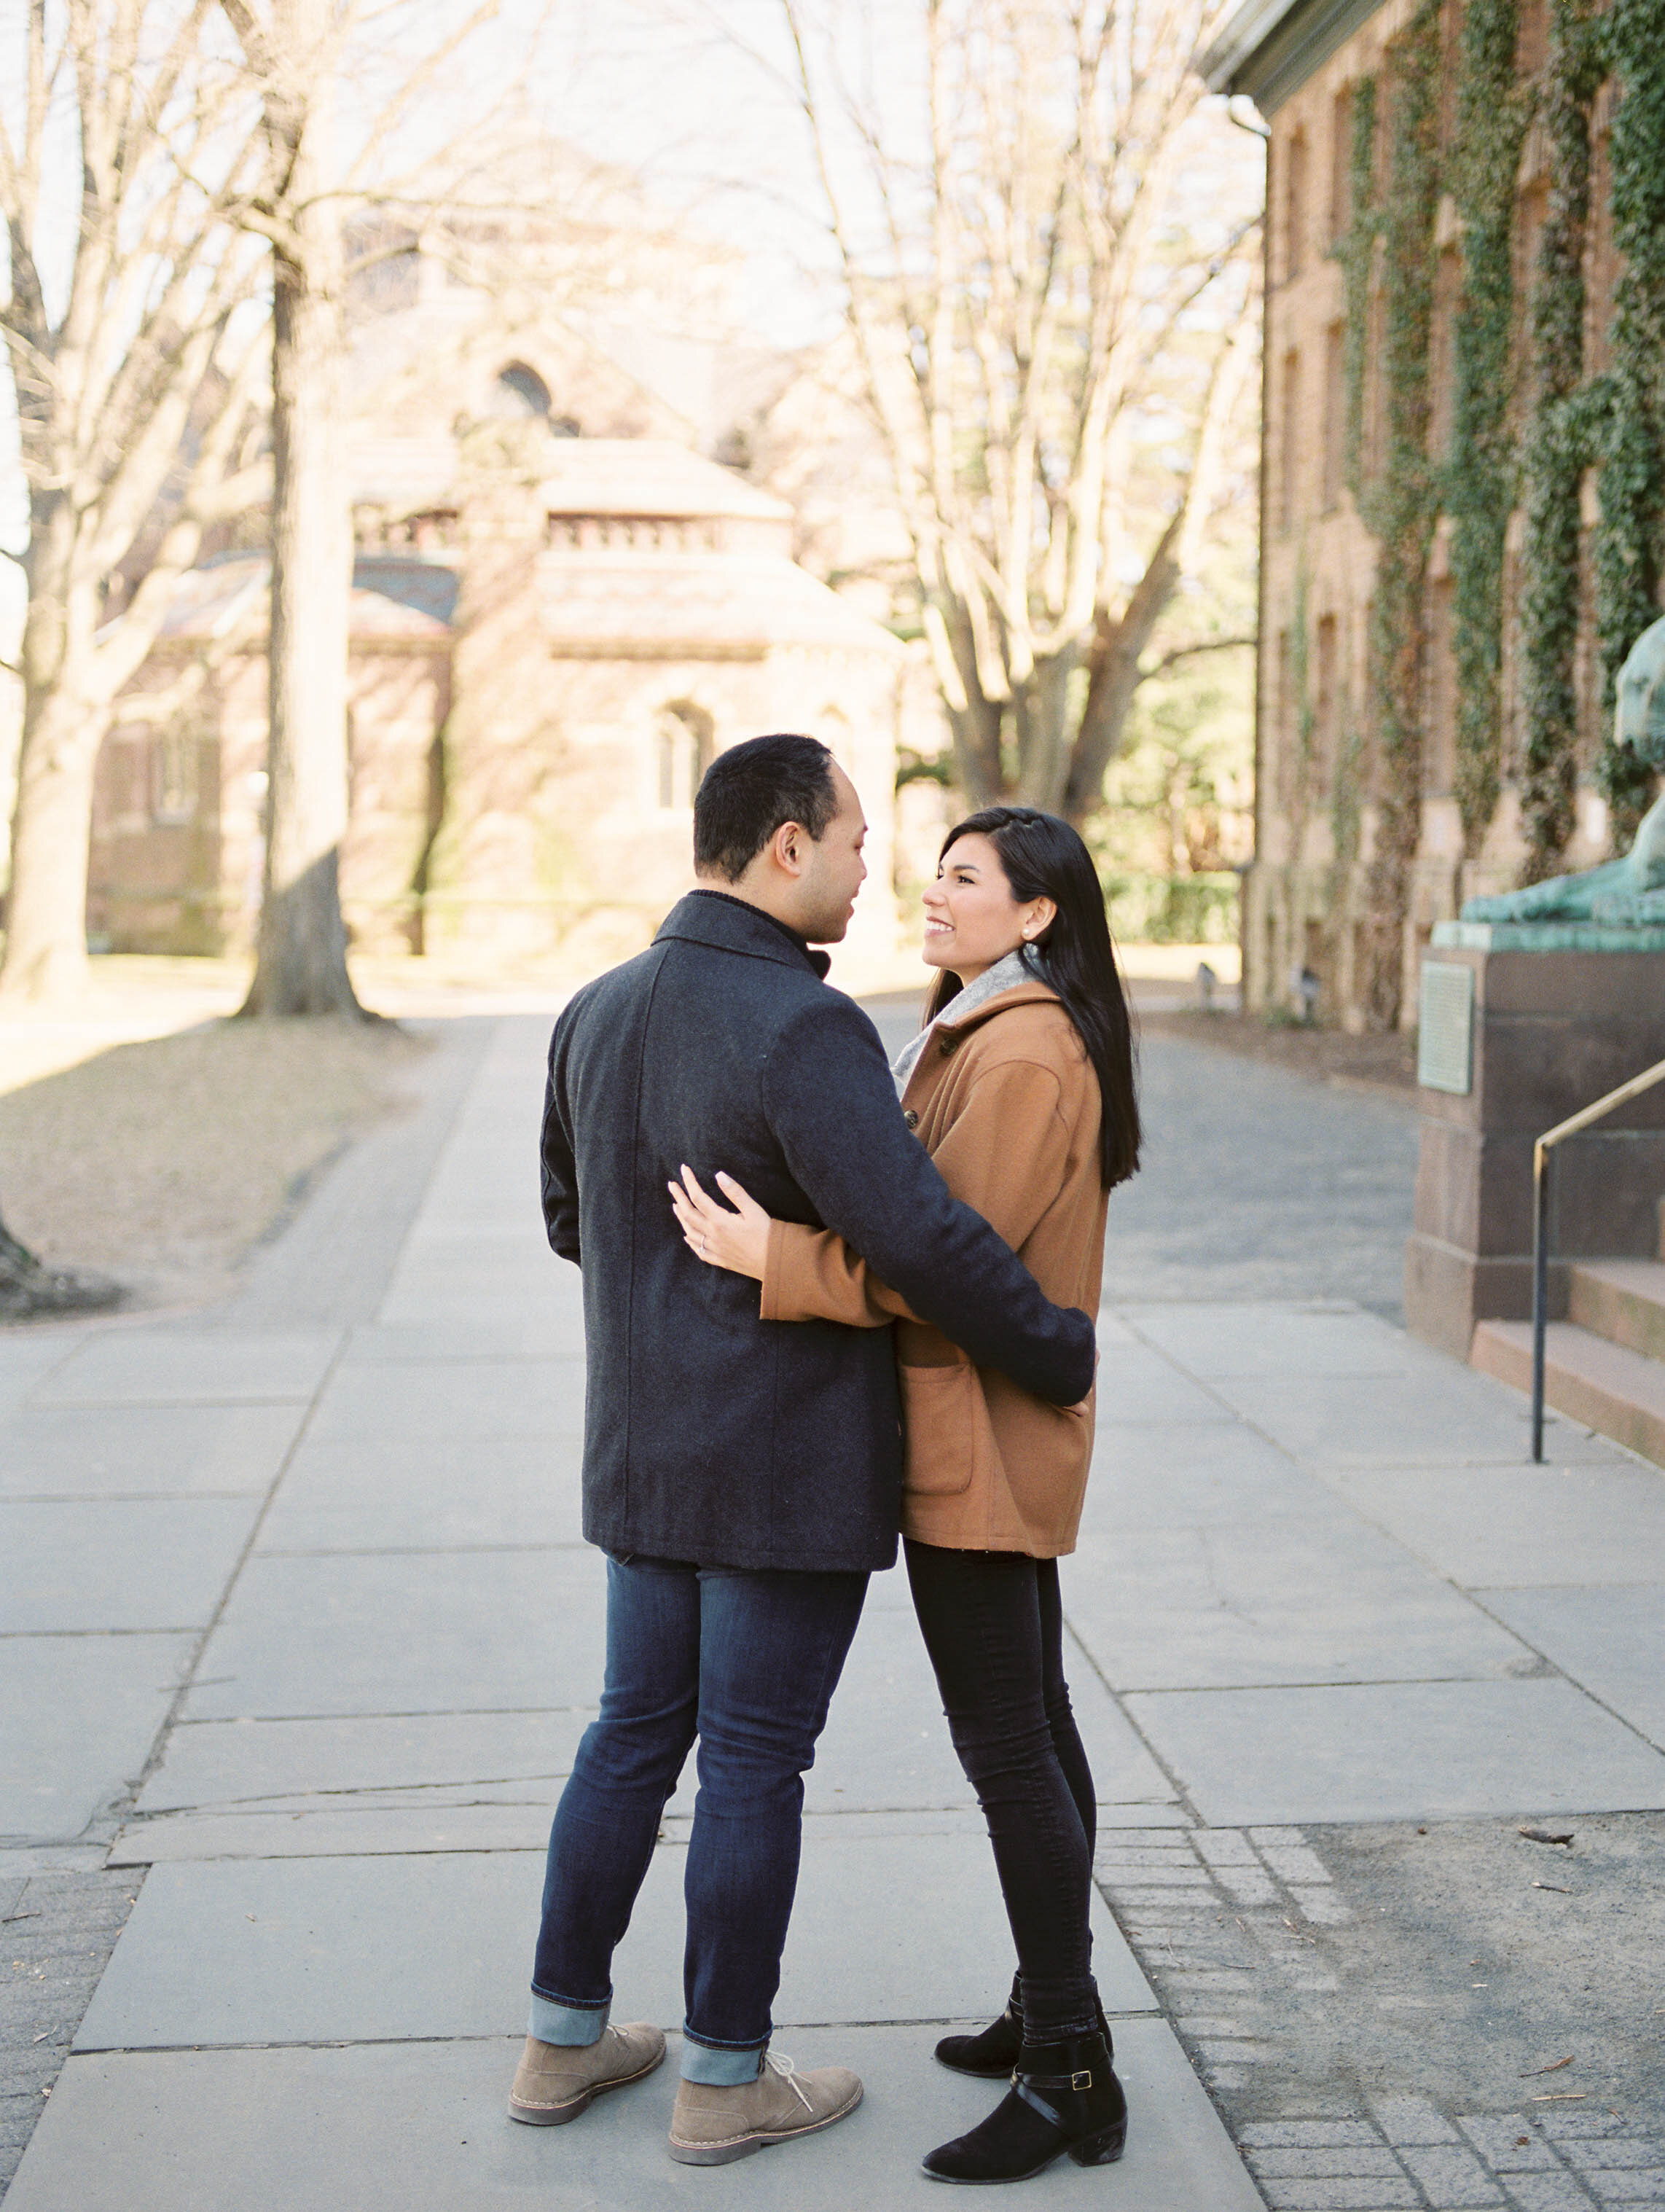 Outdoor lifestyle couples session with beige coat, sunglasses, coffee, shopping in Princeton New Jersey on Princeton University Campus by Liz Andolina Photography